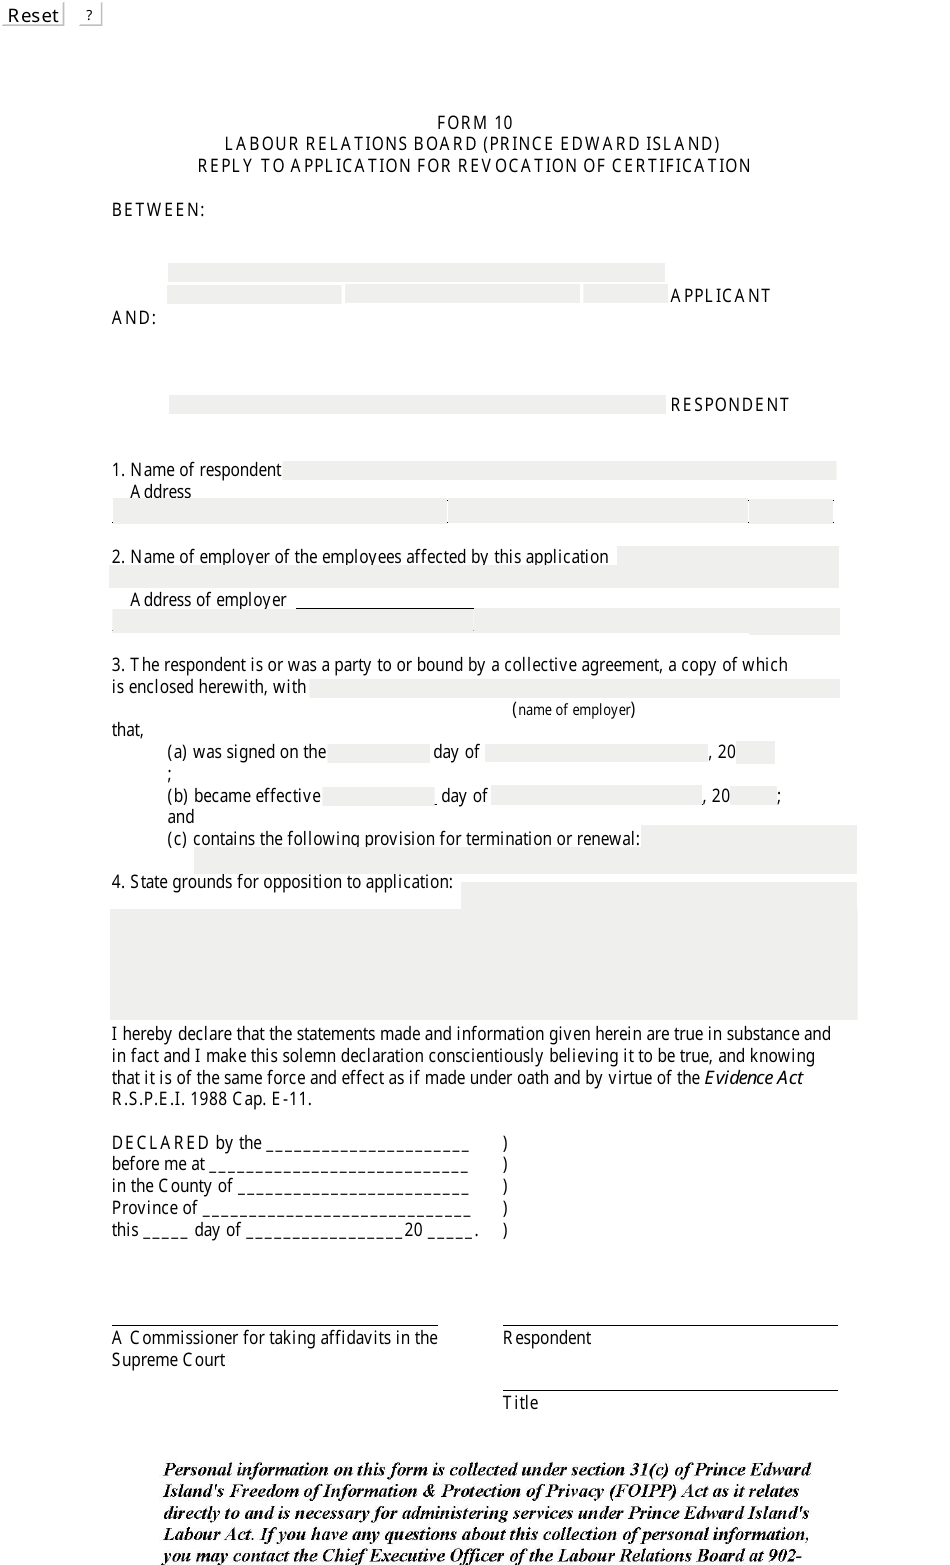 Form 10 Reply to Application for Revocation of Certification - Prince Edward Island, Canada, Page 1